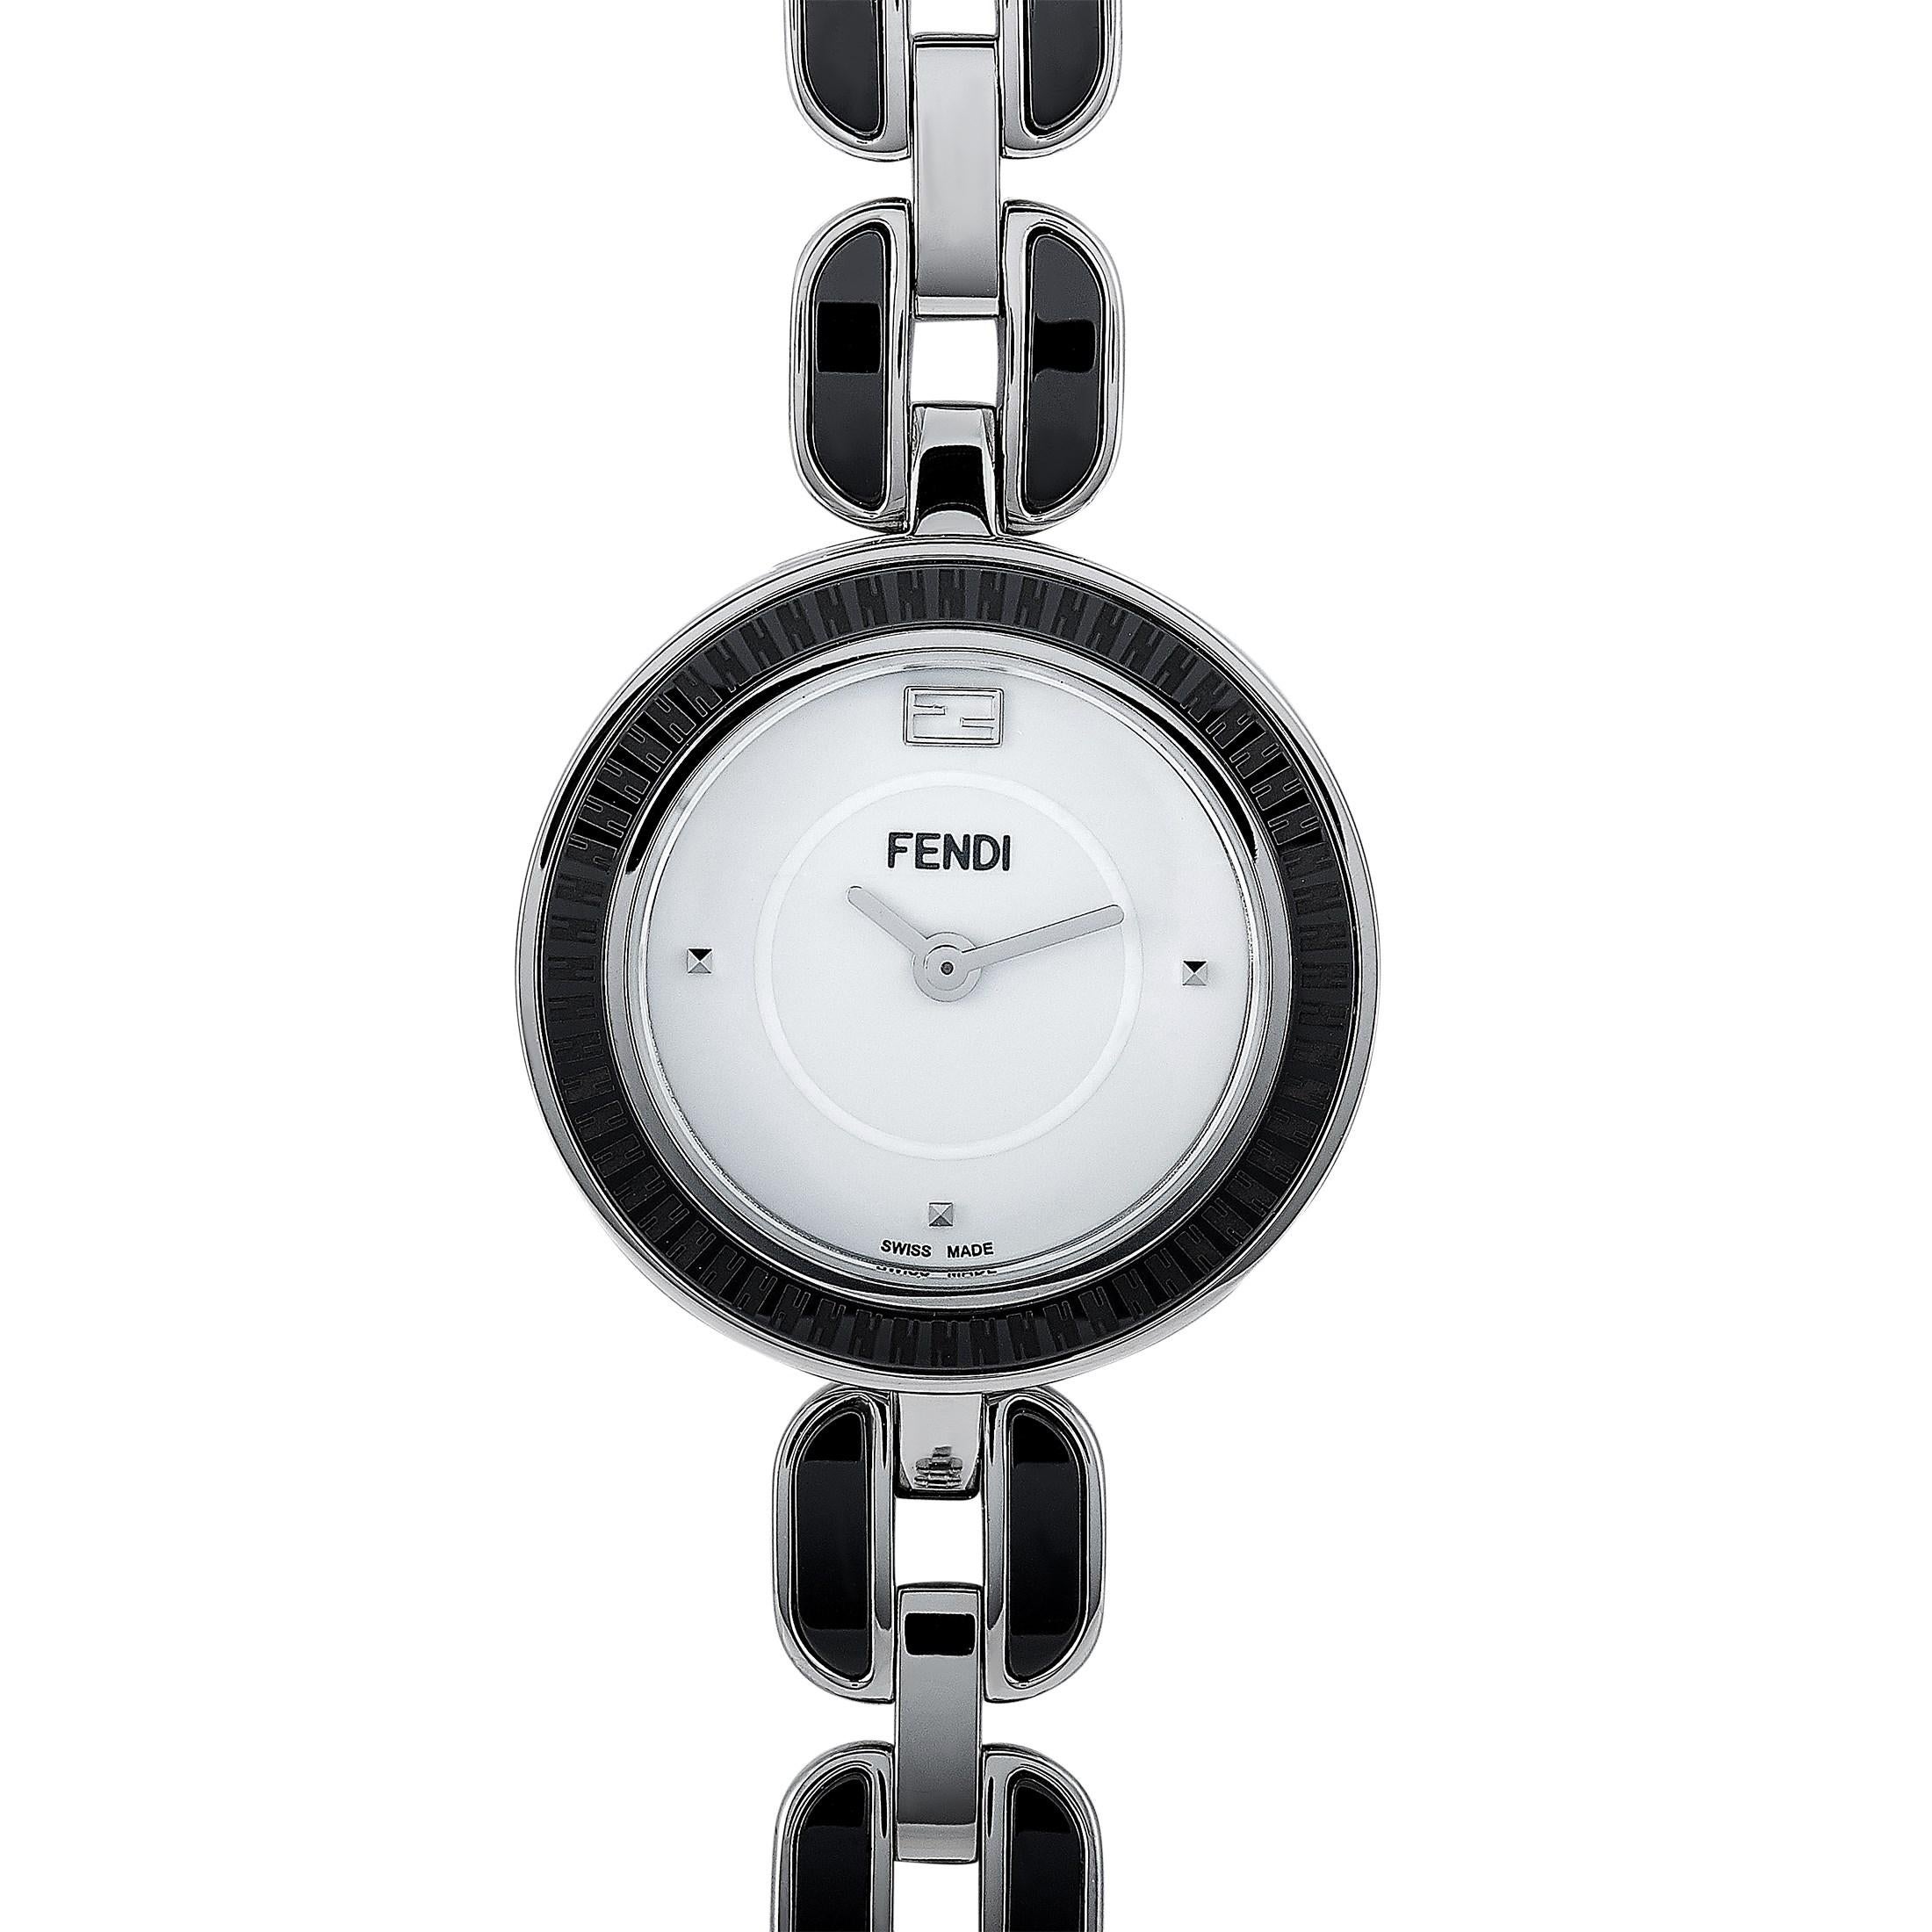 The Fendi My Way watch, reference number F353024001, comes with a 28 mm stainless steel case that boasts a bezel with a black ceramic inlay. The case is presented on a stainless steel bracelet with black ceramic inserts. This model is powered by a